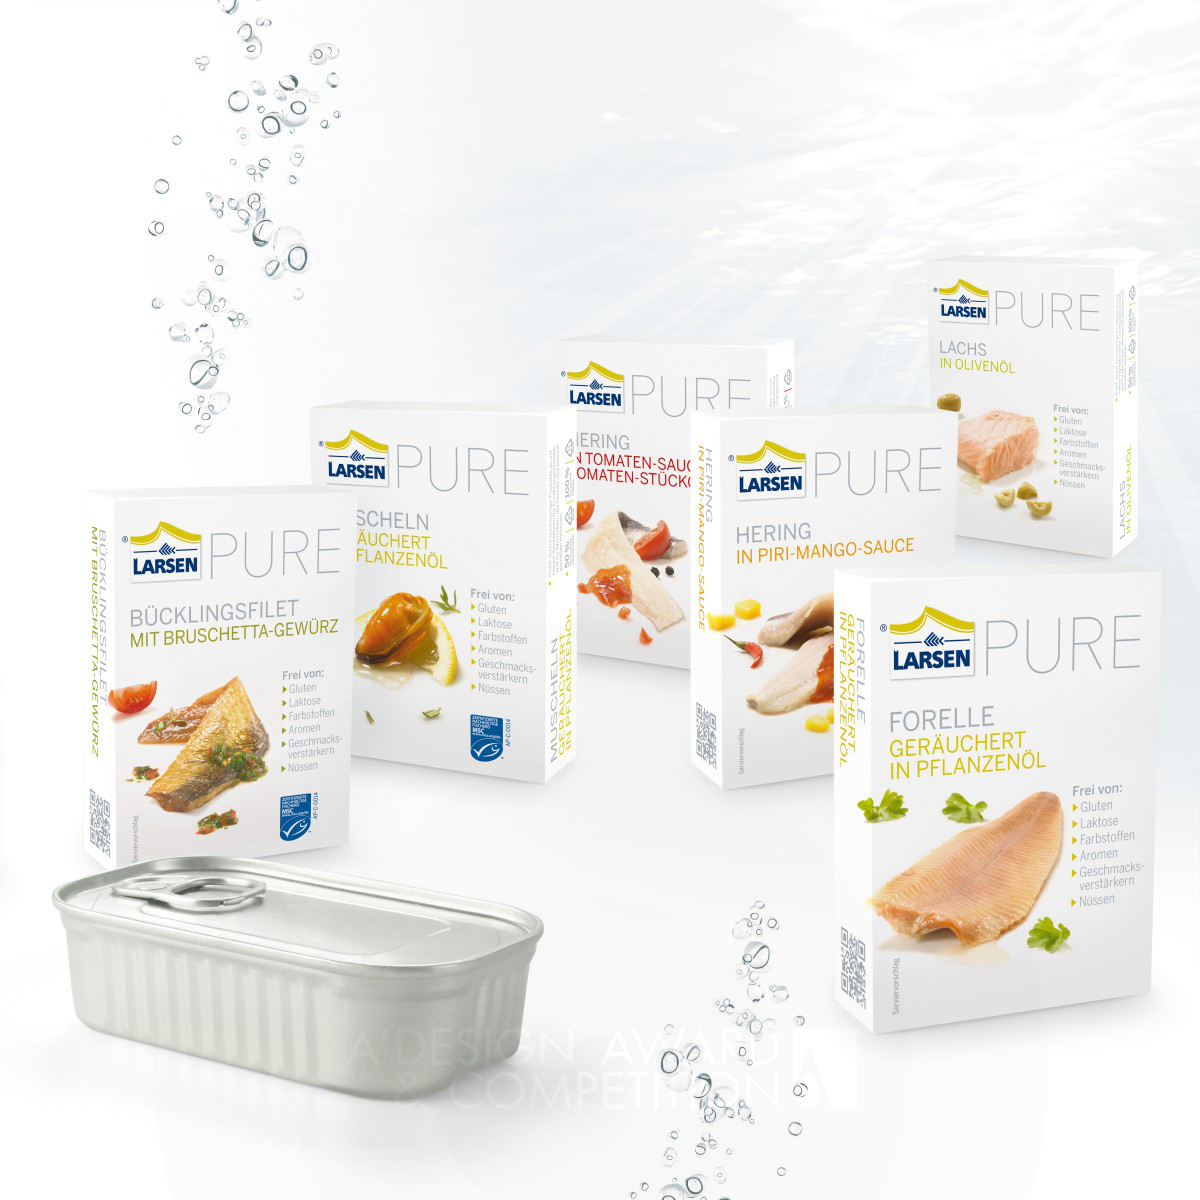 PURE seafood packaging by Bettina Gabriel